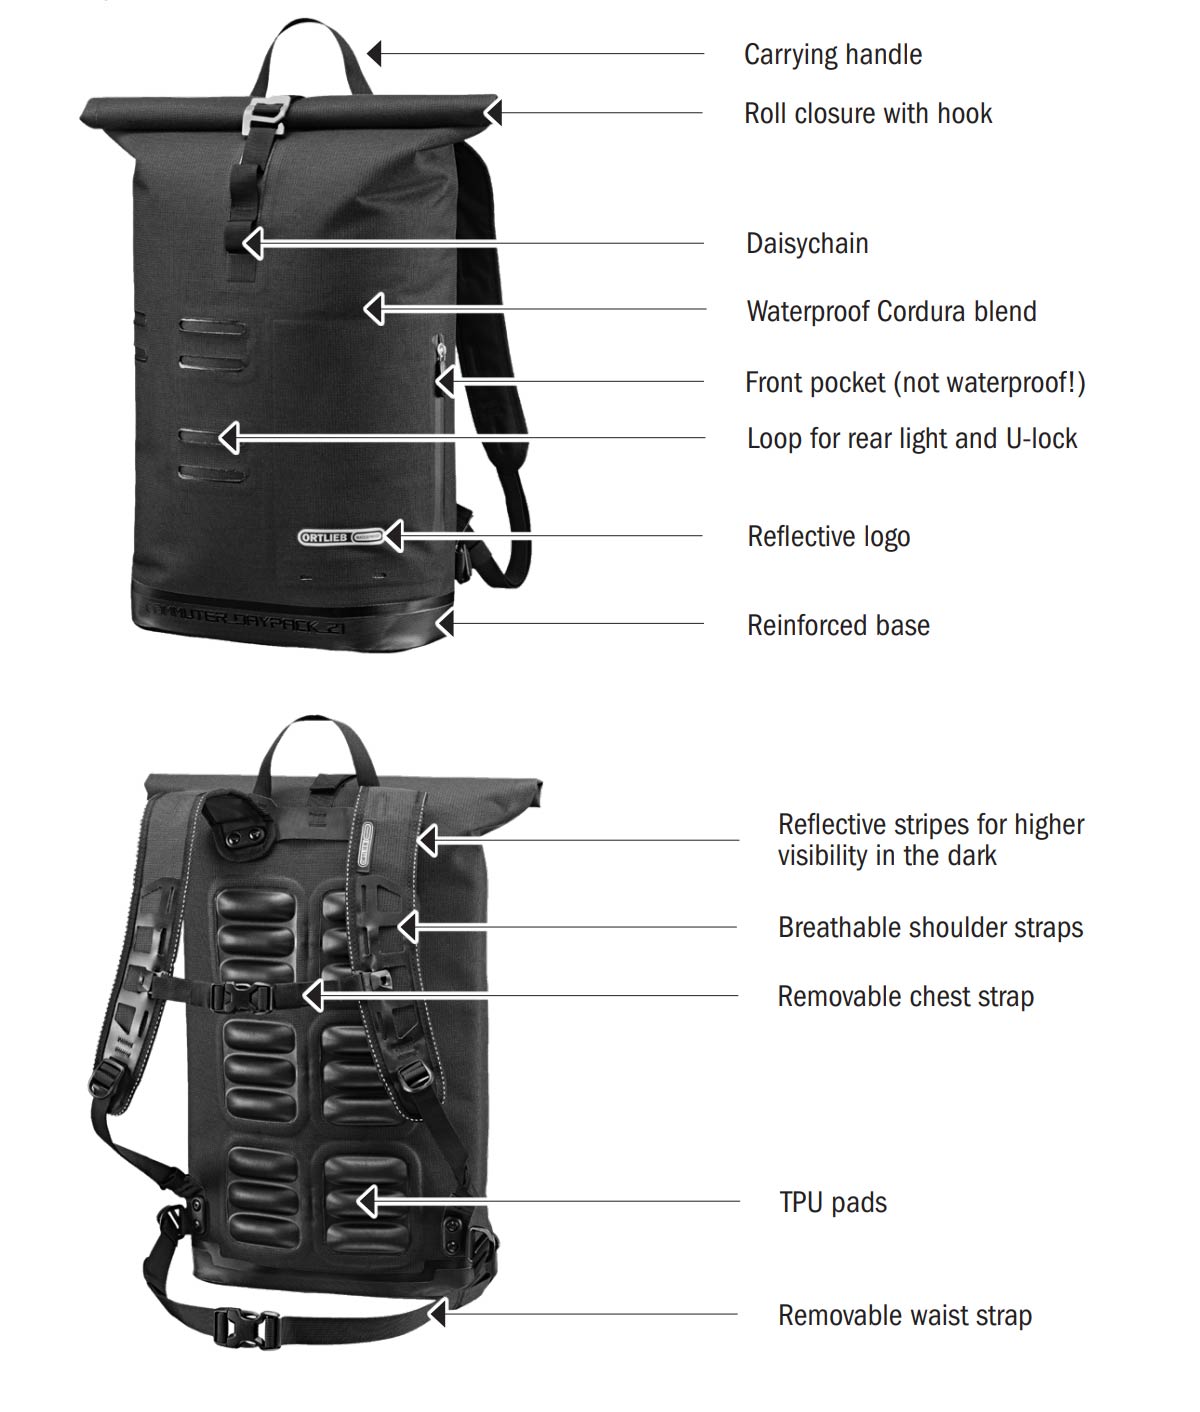 Ortlieb Commuter Daypack Urban 21L Features Overview